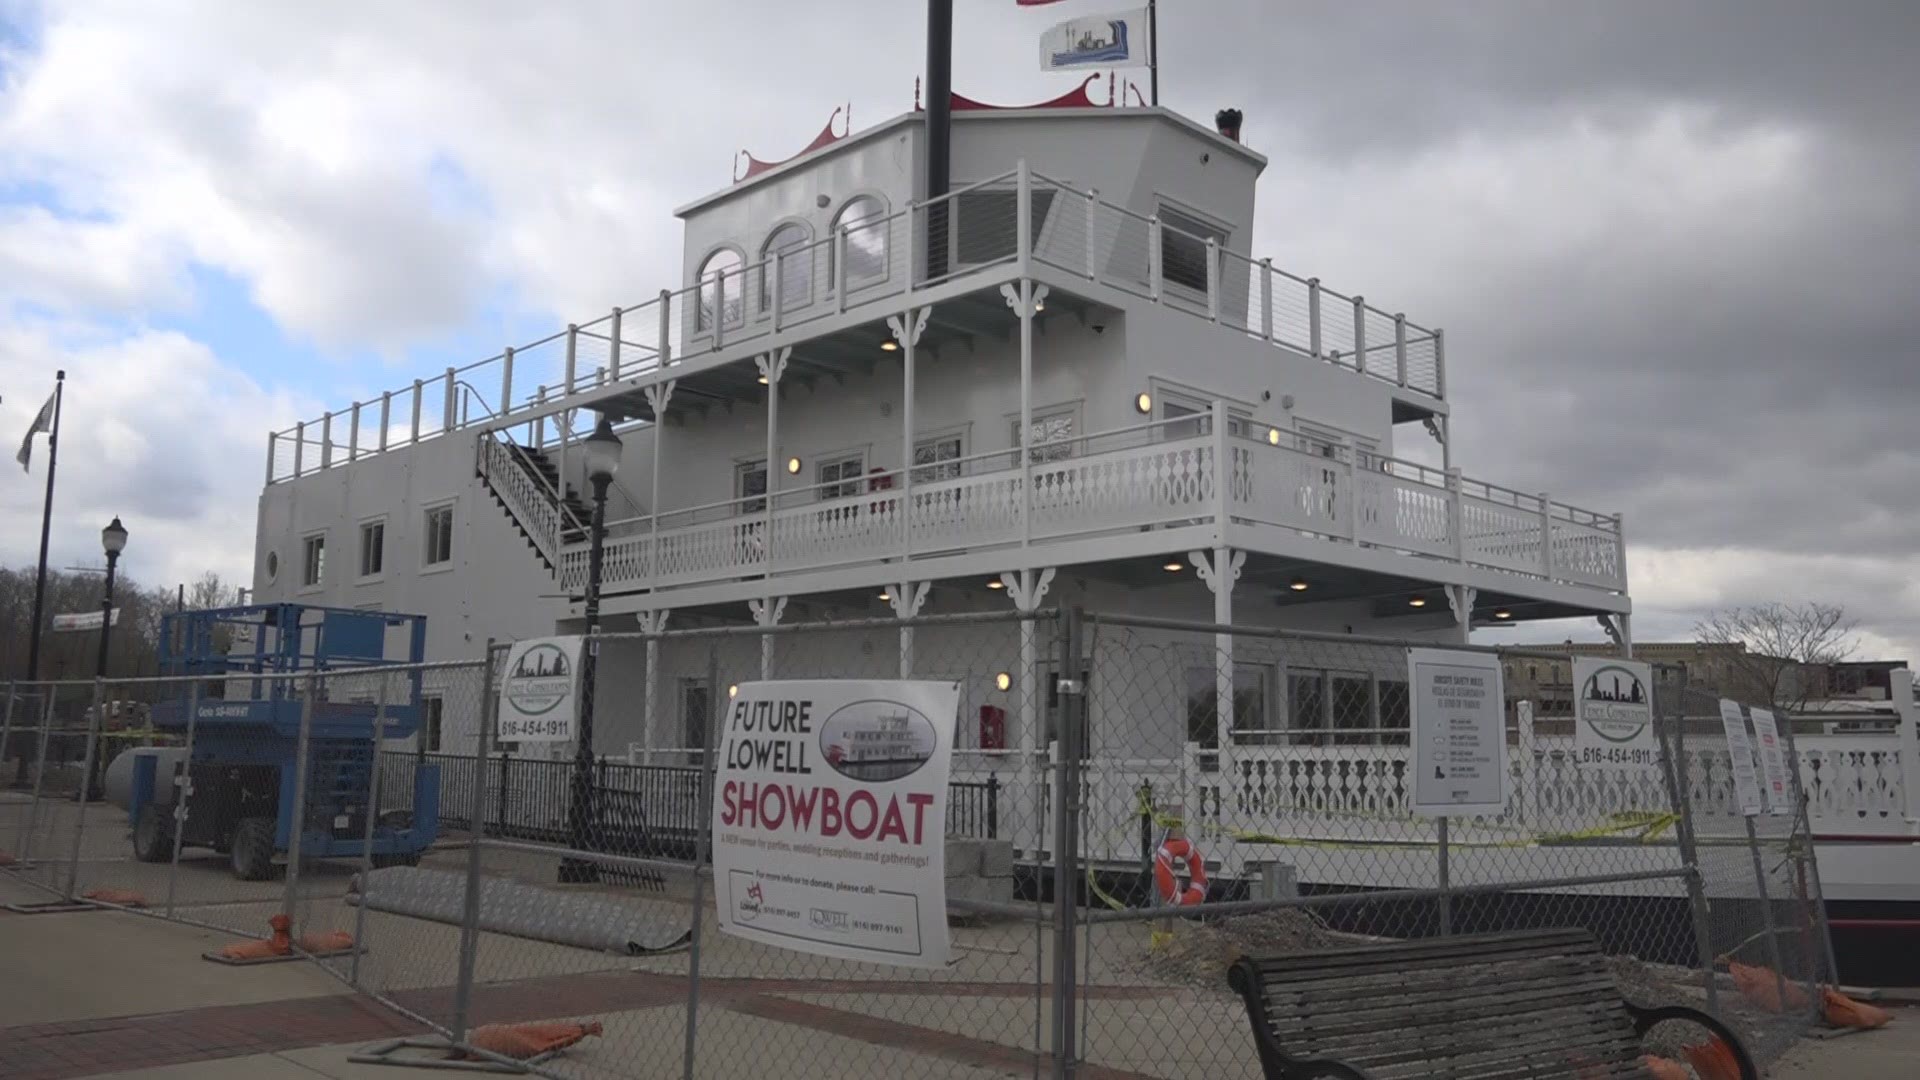 The sixth incarnation of the Lowell Showboat is nearing completion. For all the work to be completed, $48k needs to be raised by April 20.